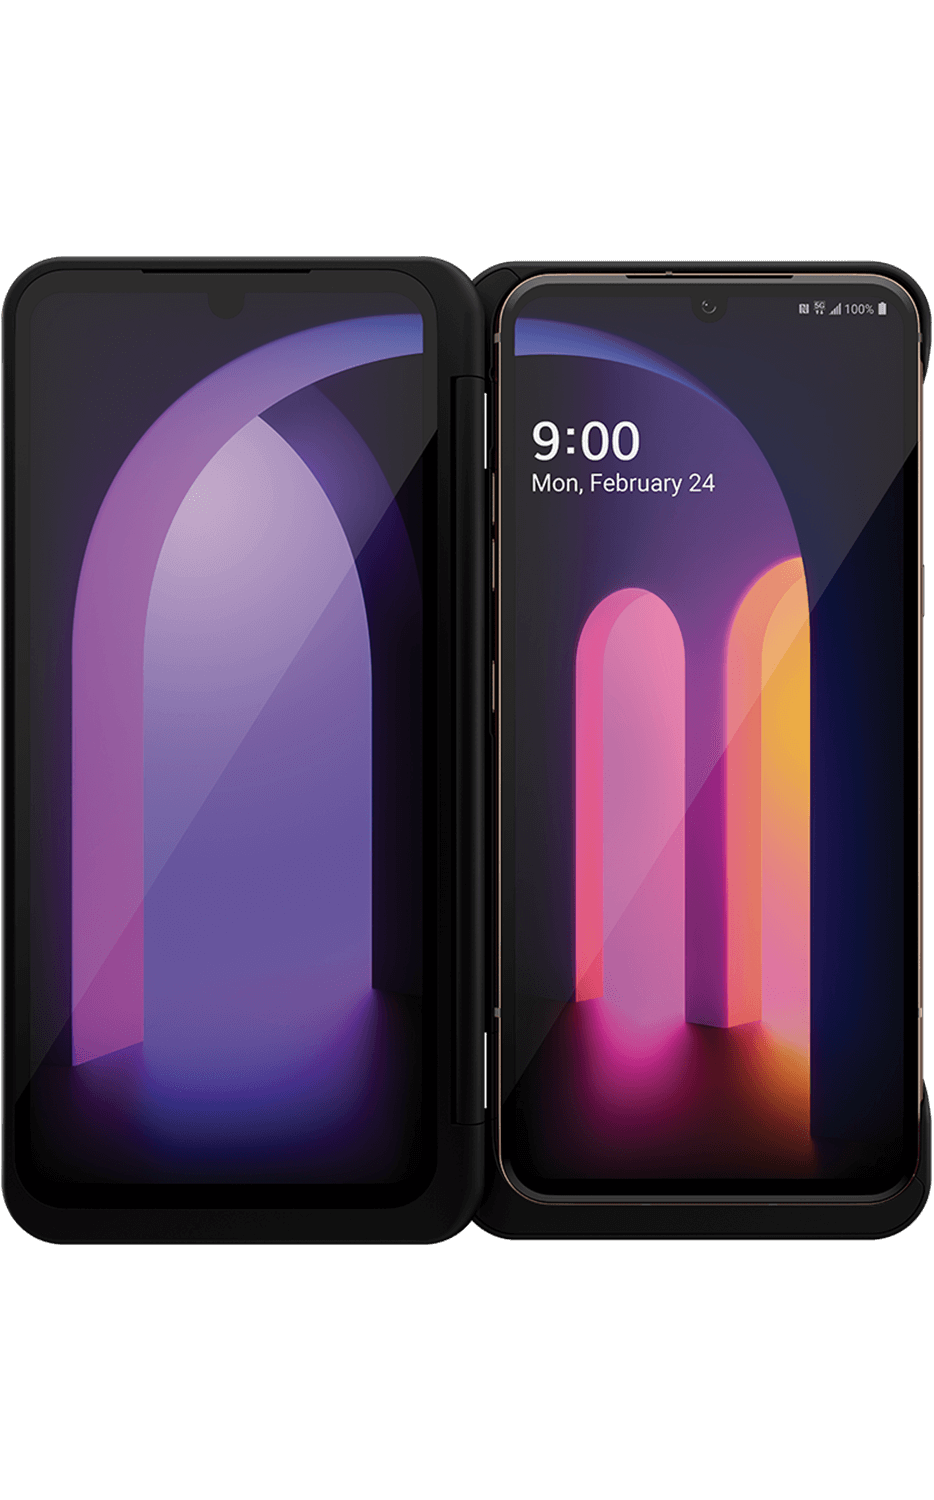 Costco T-mobile LG V60 5G Dual screen smartphone (no new line required) $399.99